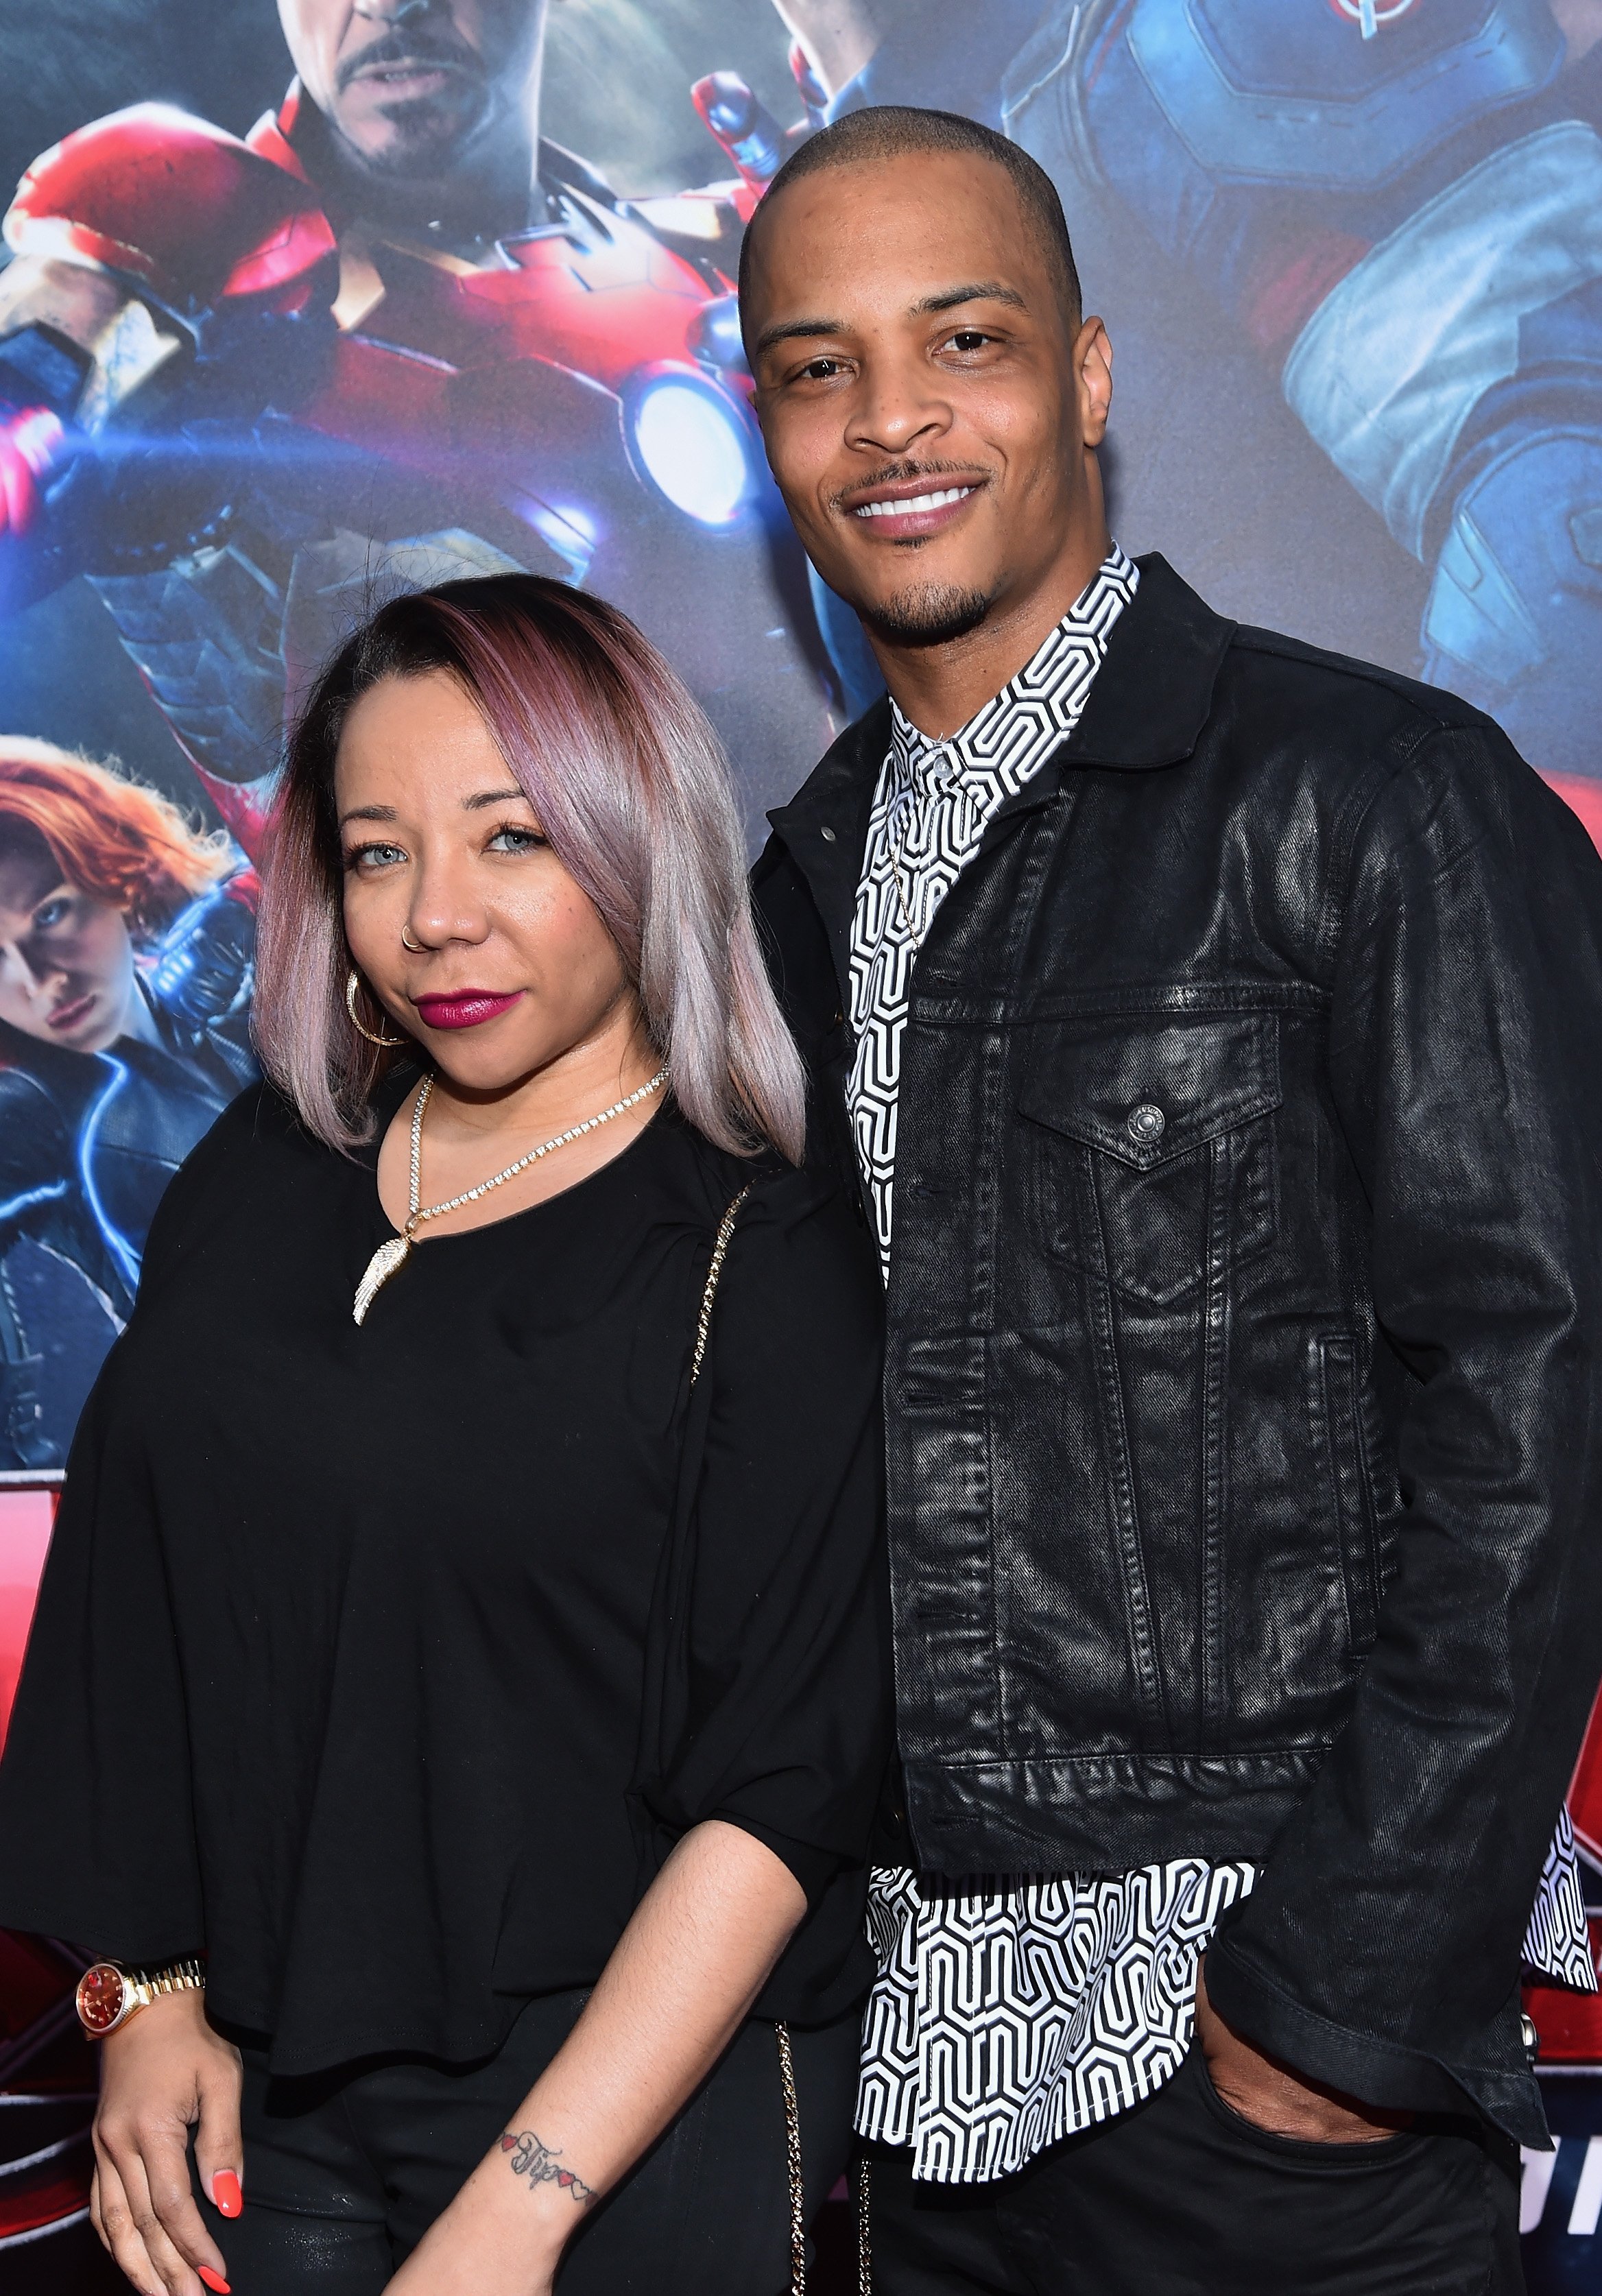 Tiny & T.I. at the world premiere of "Avengers: Age Of Ultron" at the Dolby Theatre on Apr. 13, 2015 in Hollywood, California. | Photo: Getty Images